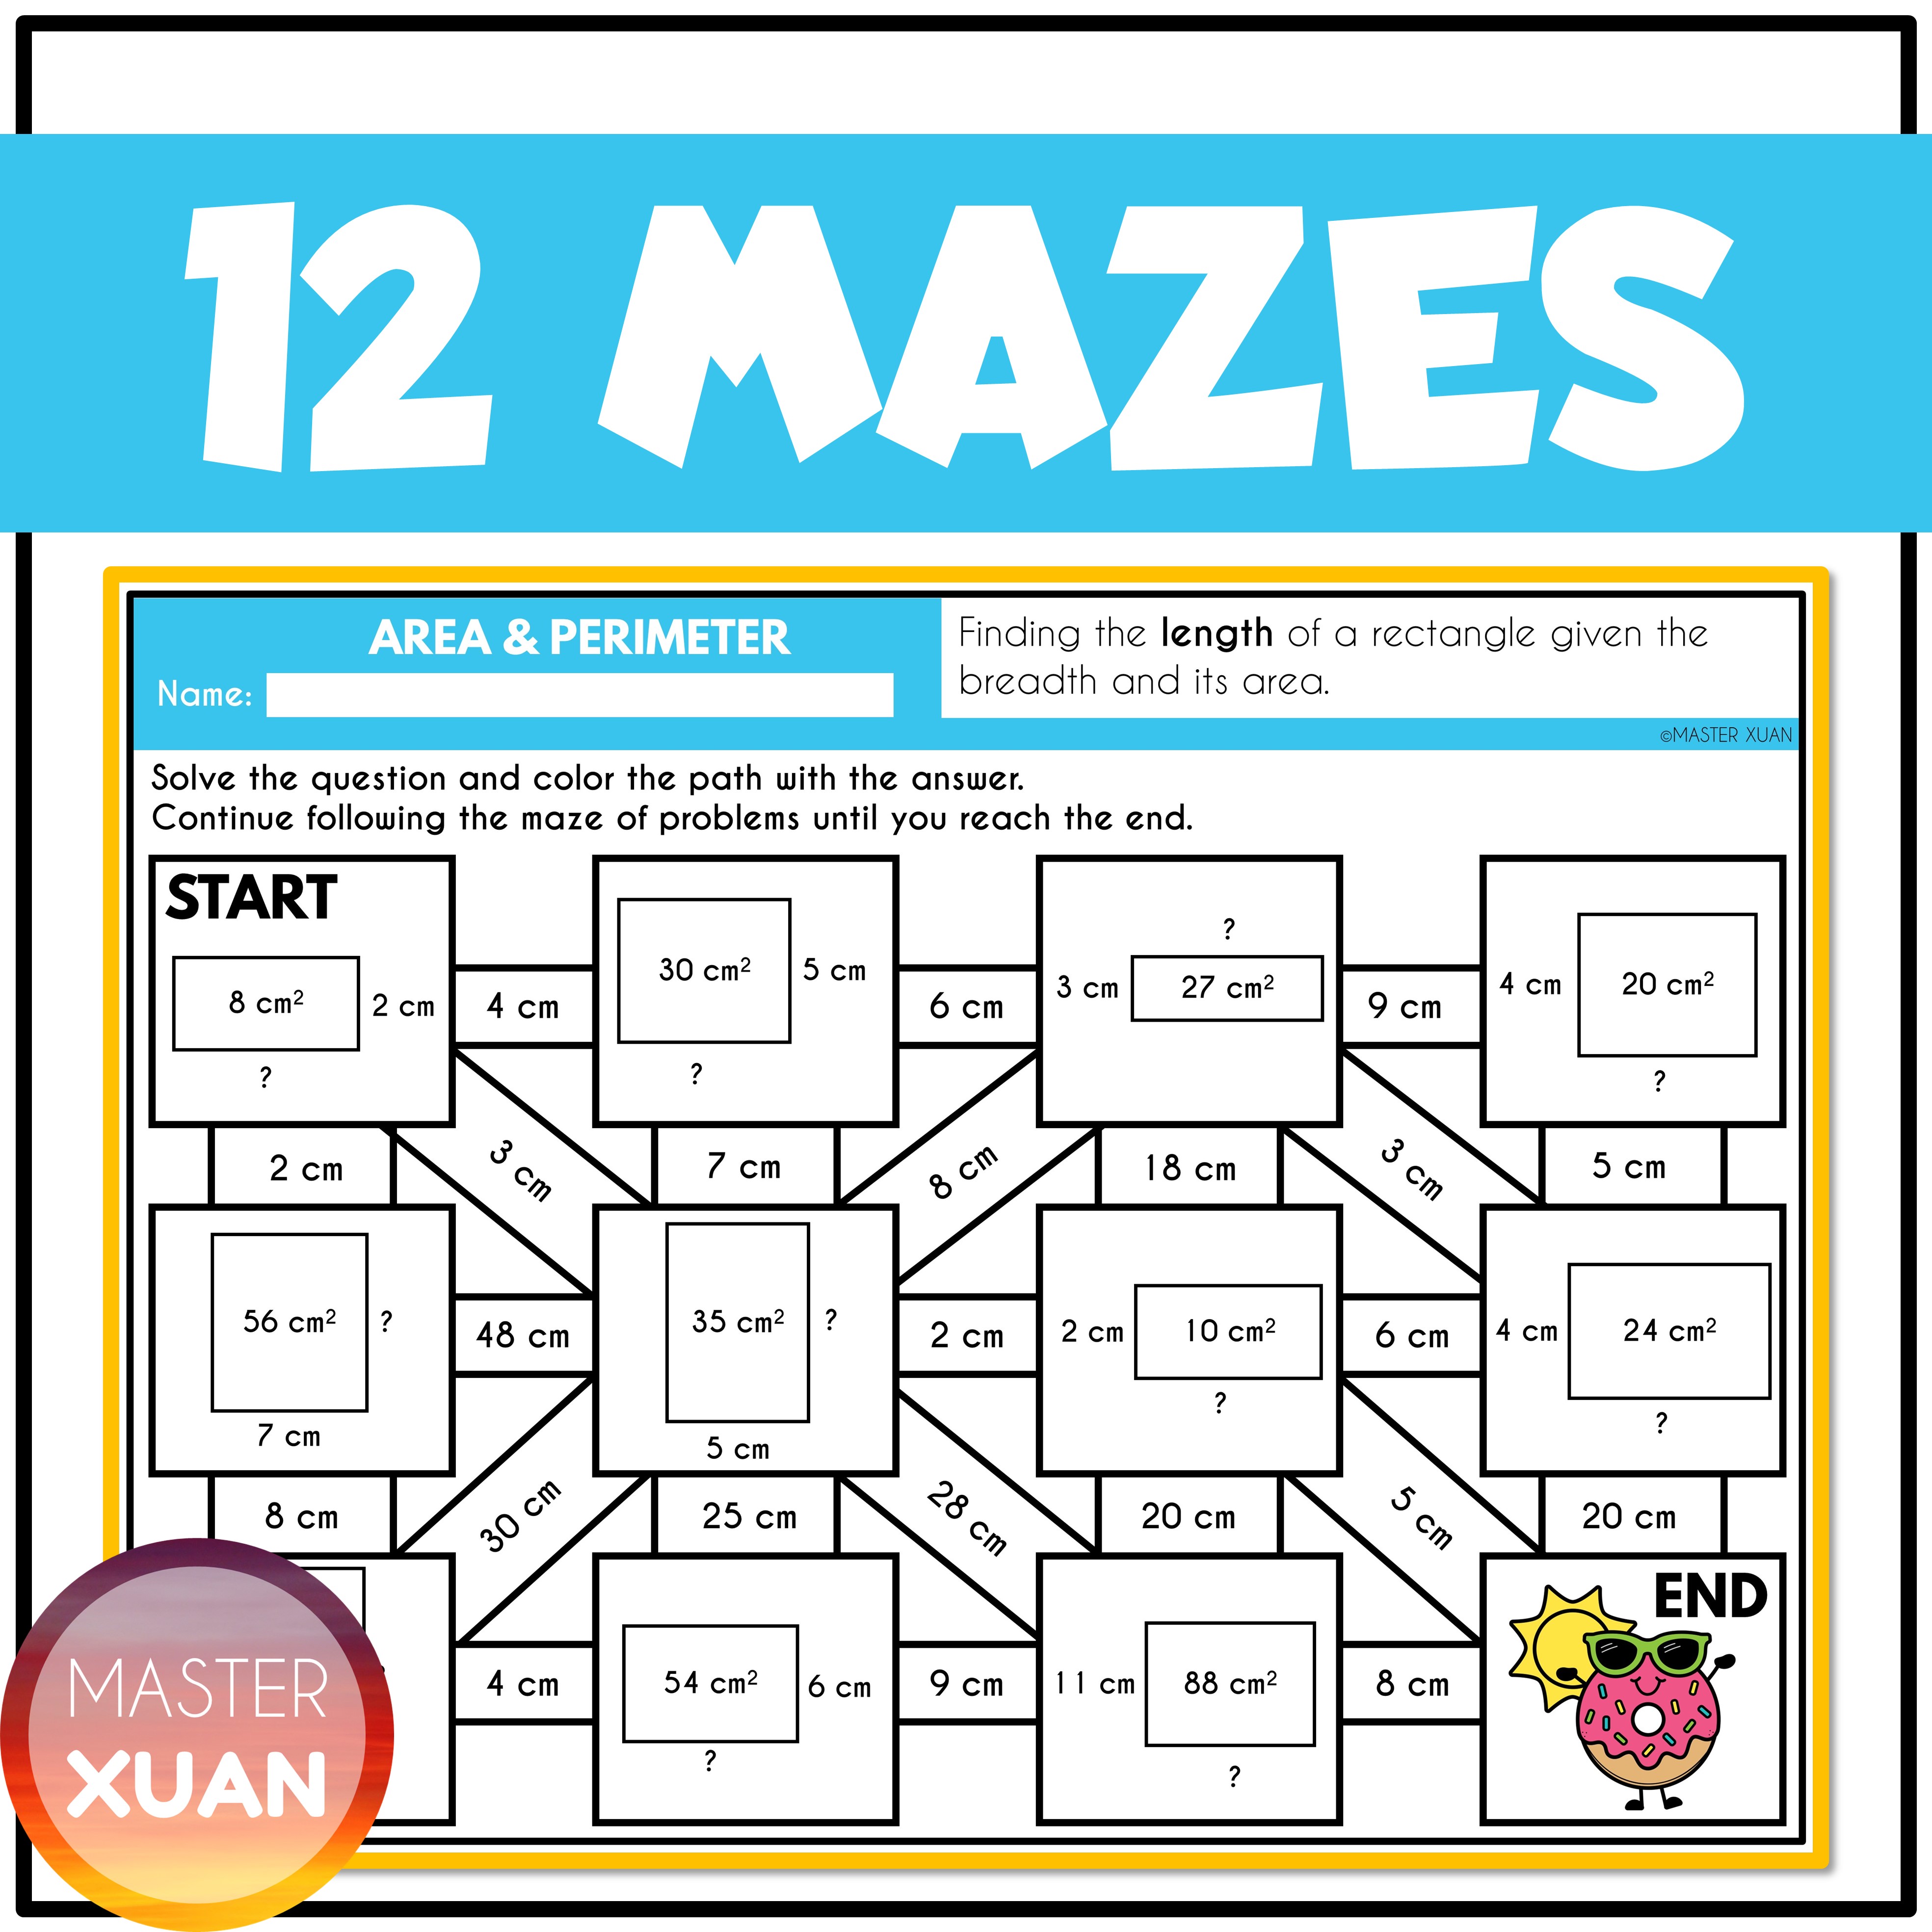 Activity on area and perimeter math resource has 12 mazes.